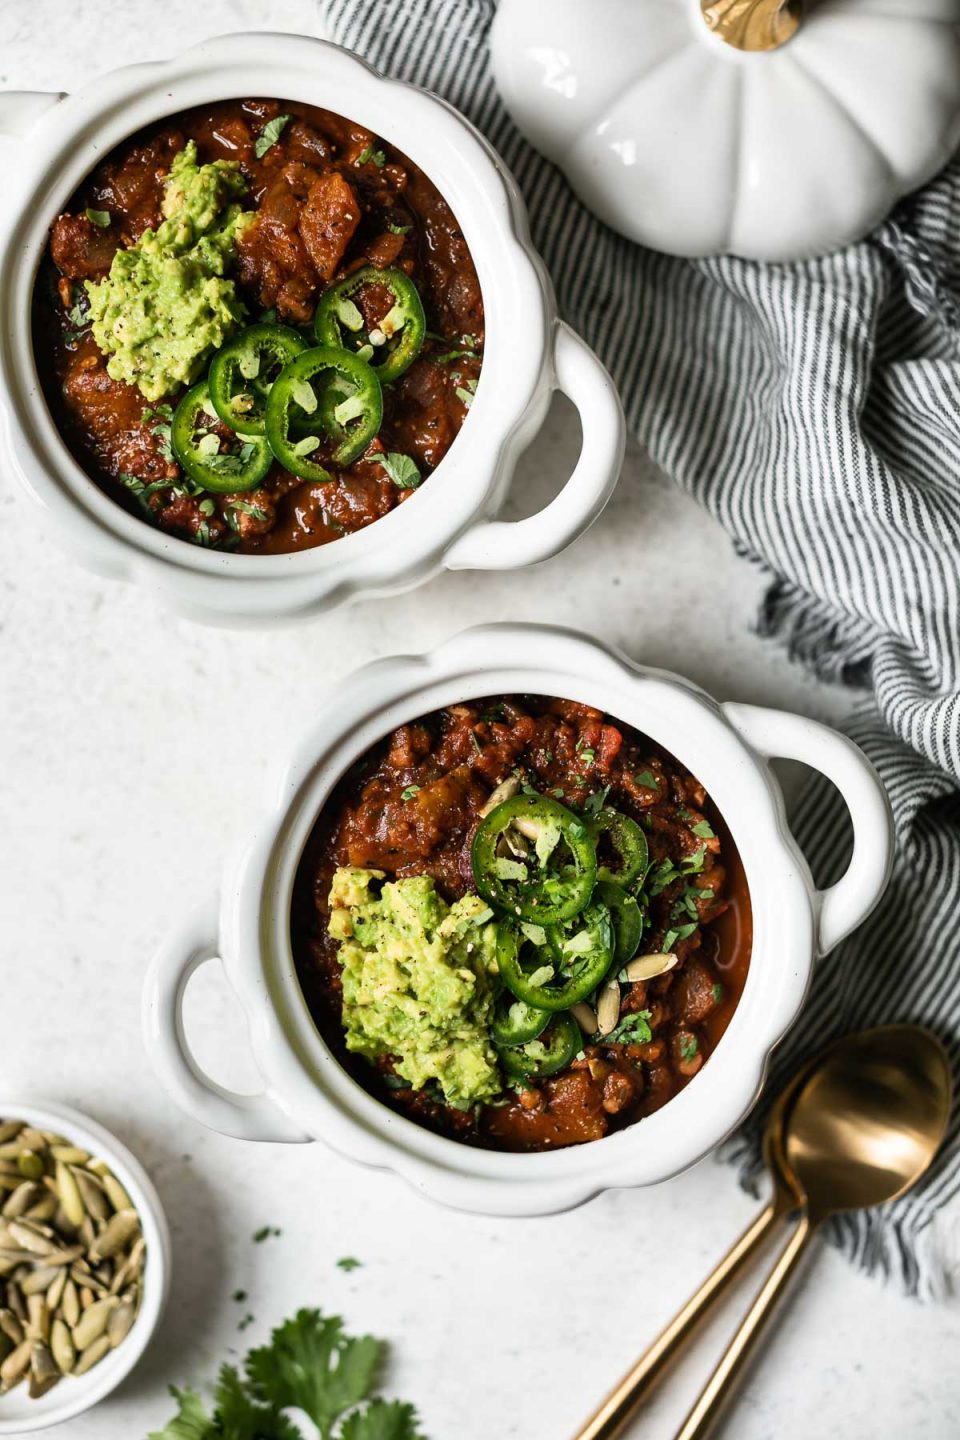 Vegan pumpkin chili shown in 2 small white pumpkin-shaped bowls. The chili is topped with guacamole & sliced jalapeno. The bowls sit atop a white backdrop with a striped linen napkin, 2 gold spoons, a small bowl of pepita pumpkin seeds, & a few cilantro leaves.